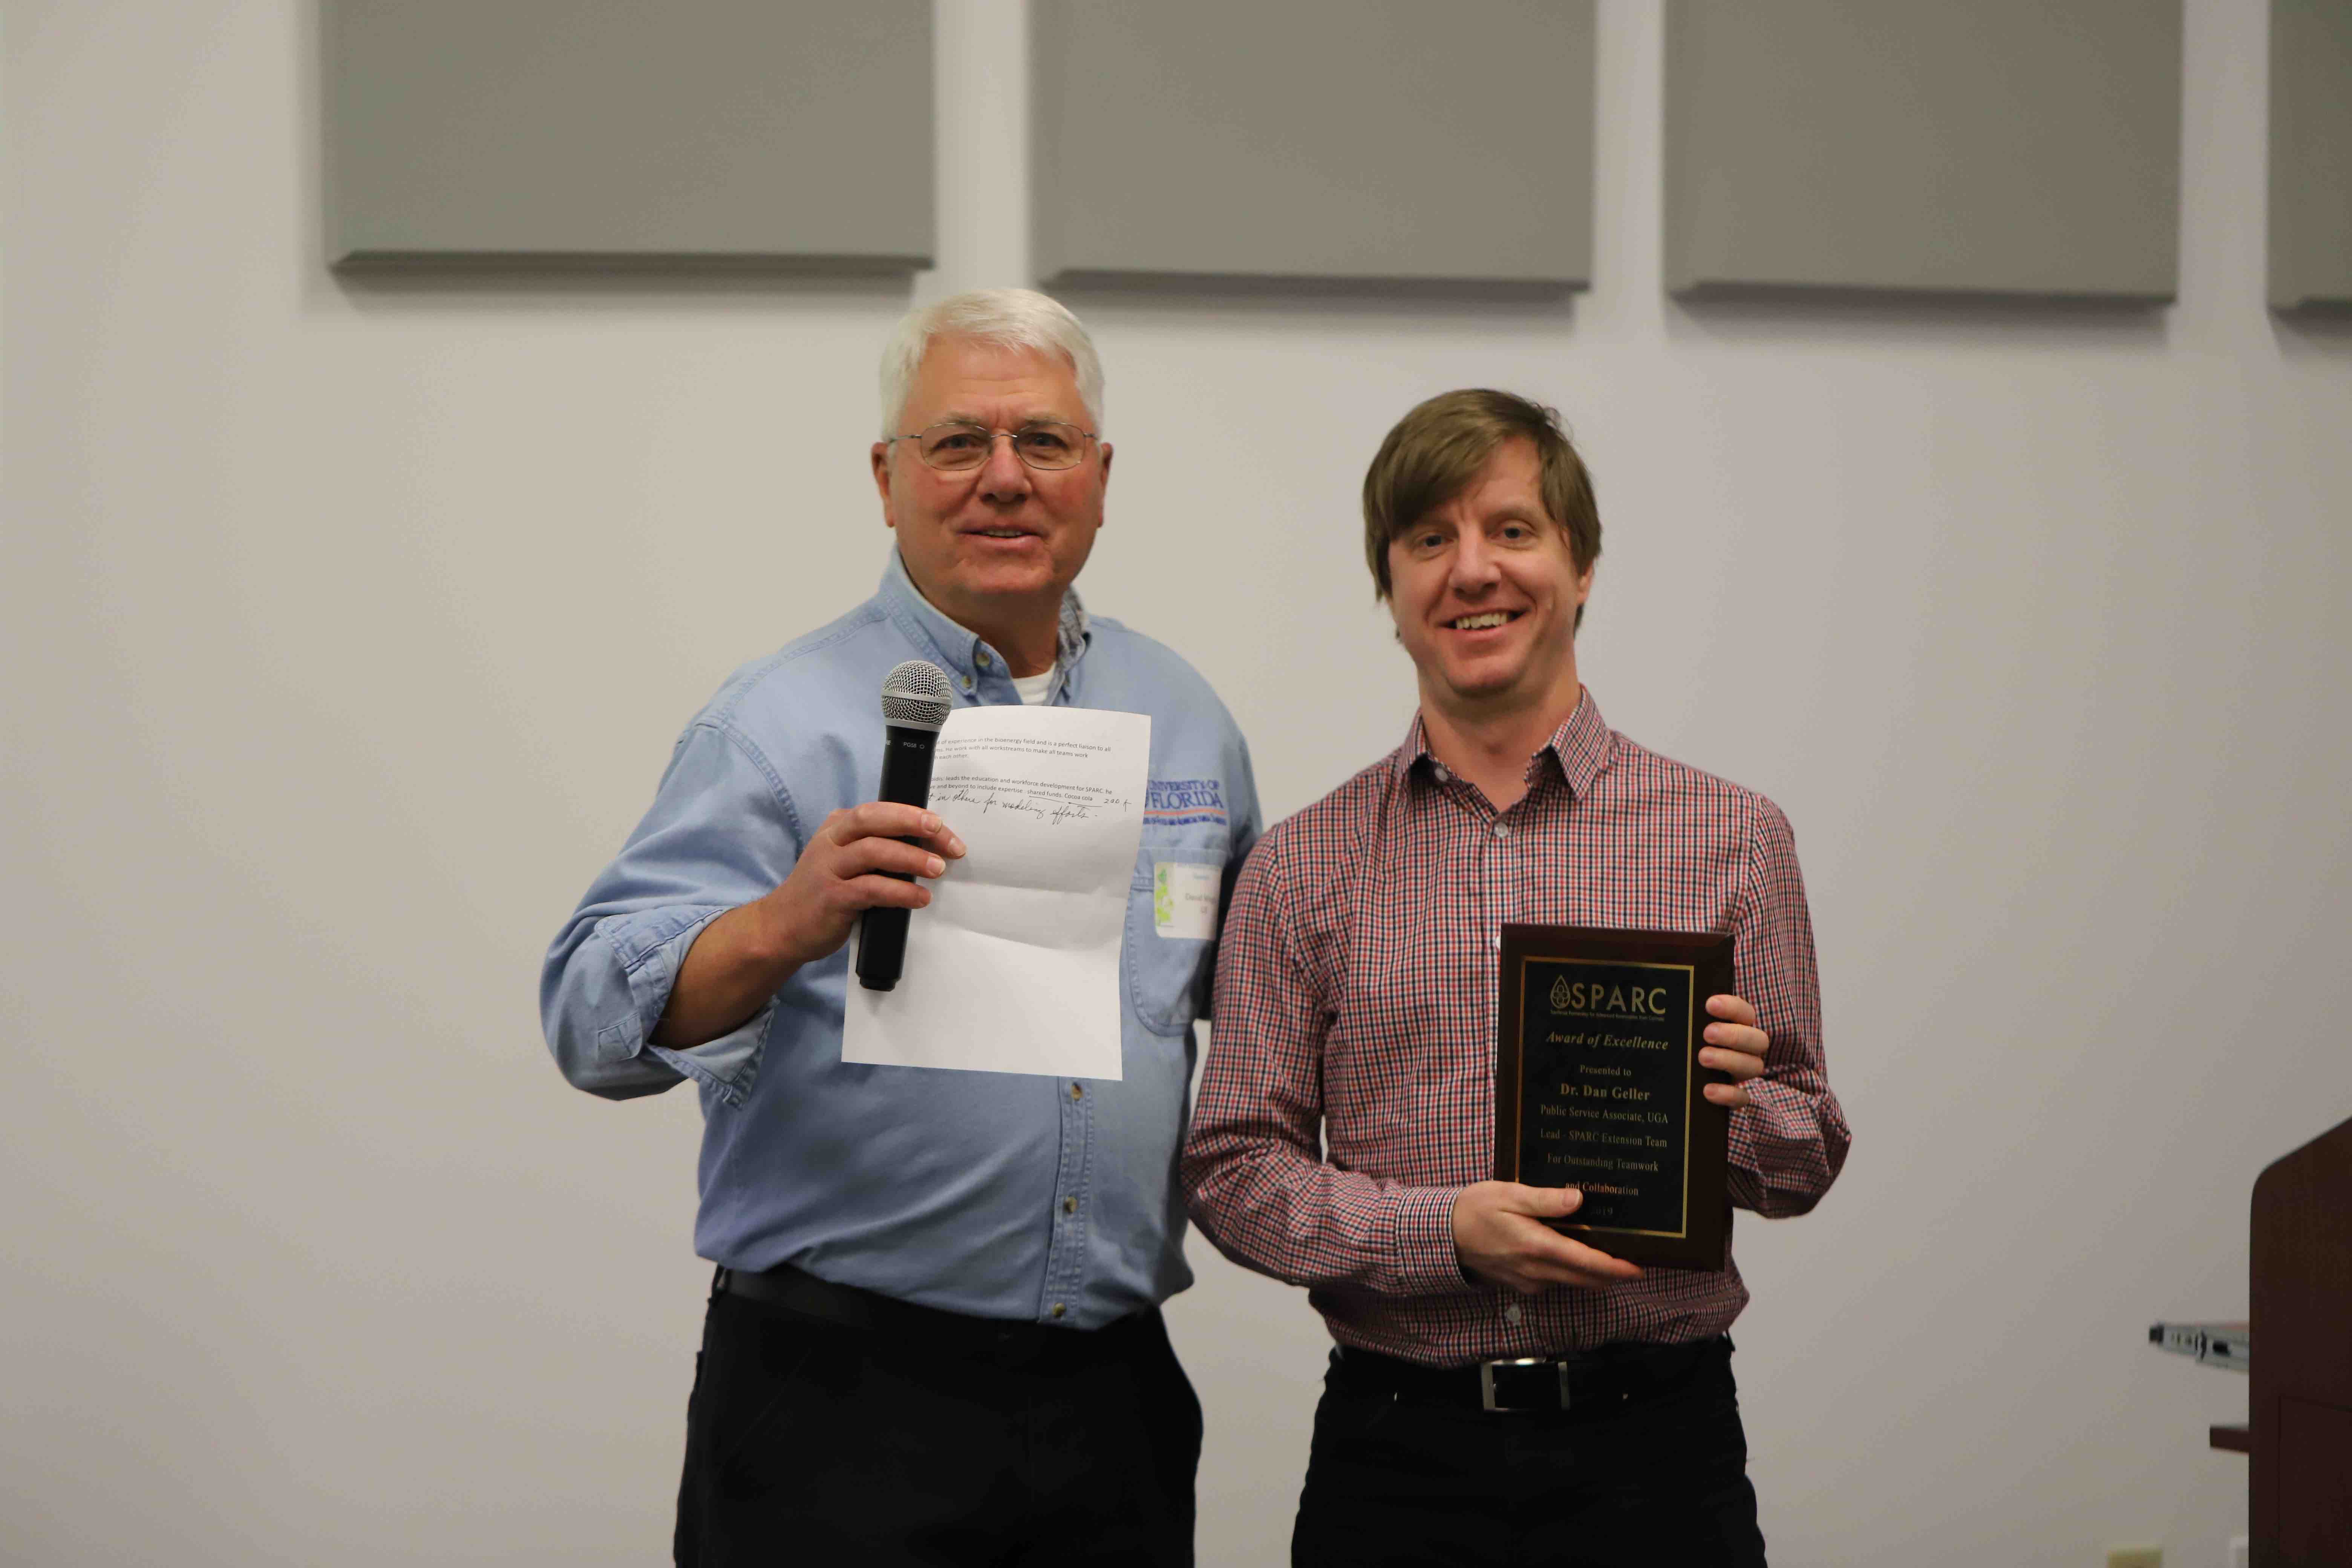 Dan Geller (SPARC Extension lead) receives the SPARC award for Outstanding Teamwork and Collaboration from PI David Wright